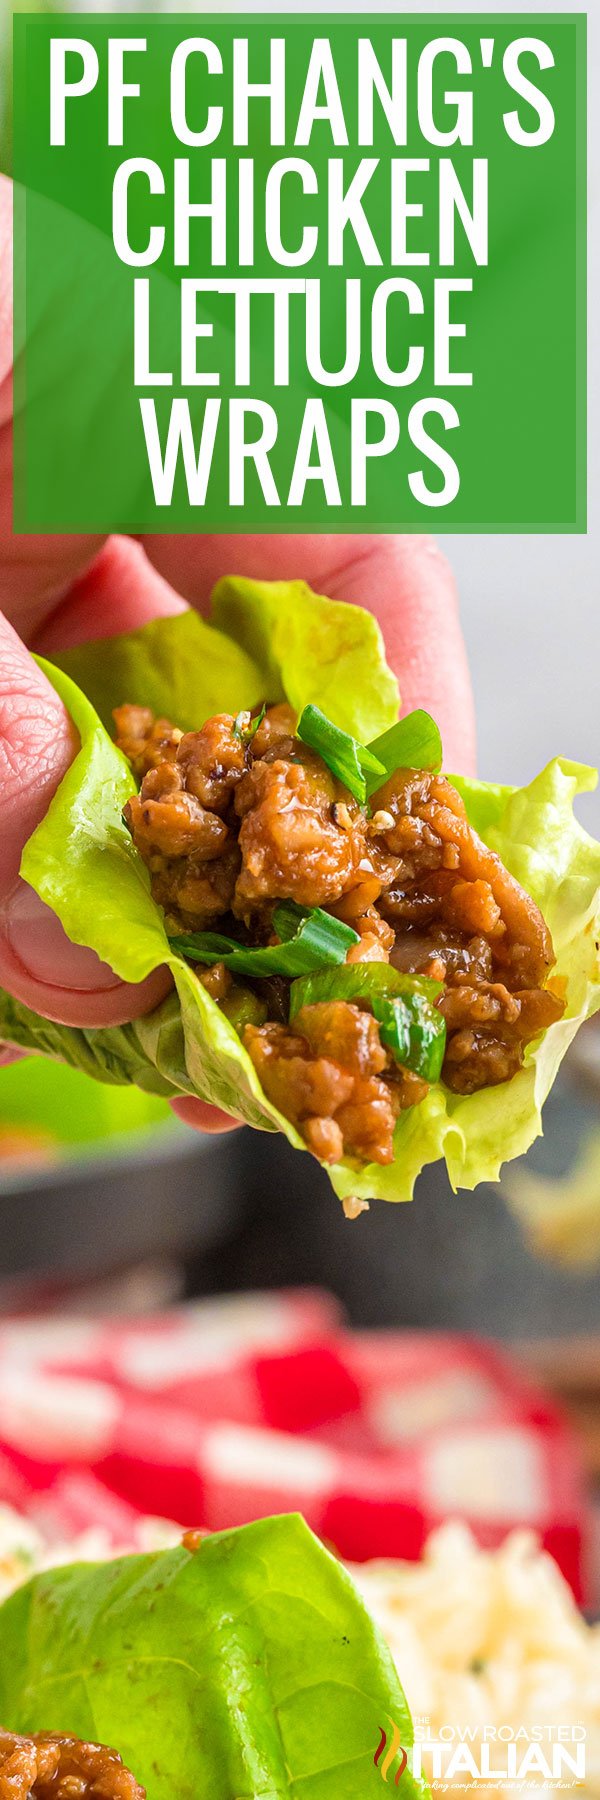 PF Chang's Chicken Lettuce Wraps - PIN